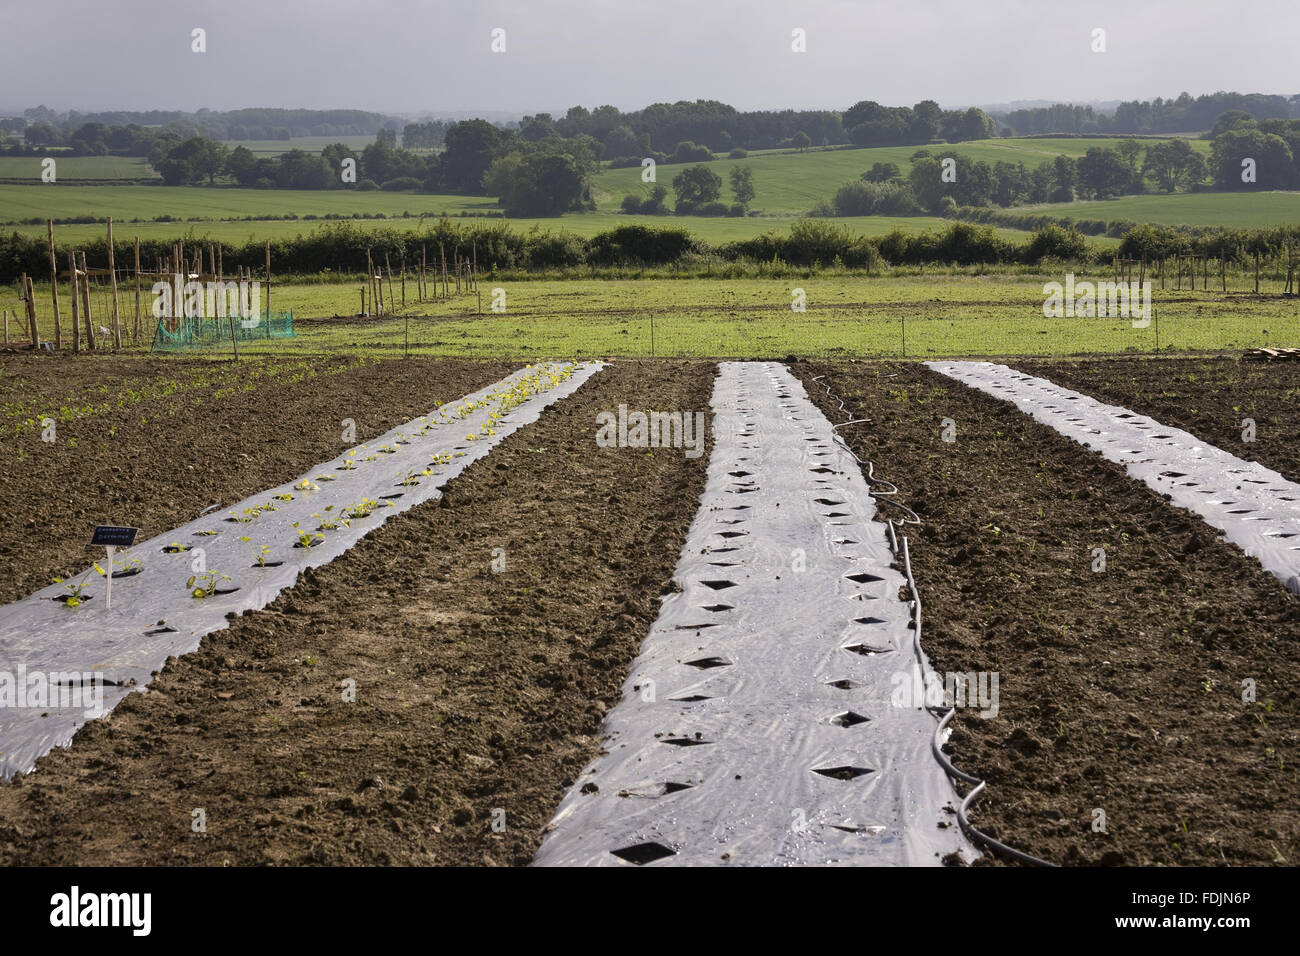 Black plastic weed control in the new vegetable garden at Sissinghurst Castle. A new project aims to reconnect the garden with the farm landscape by producing organically-grown vegetables for use in the restaurant and creating a mixed farm environment aro Stock Photo